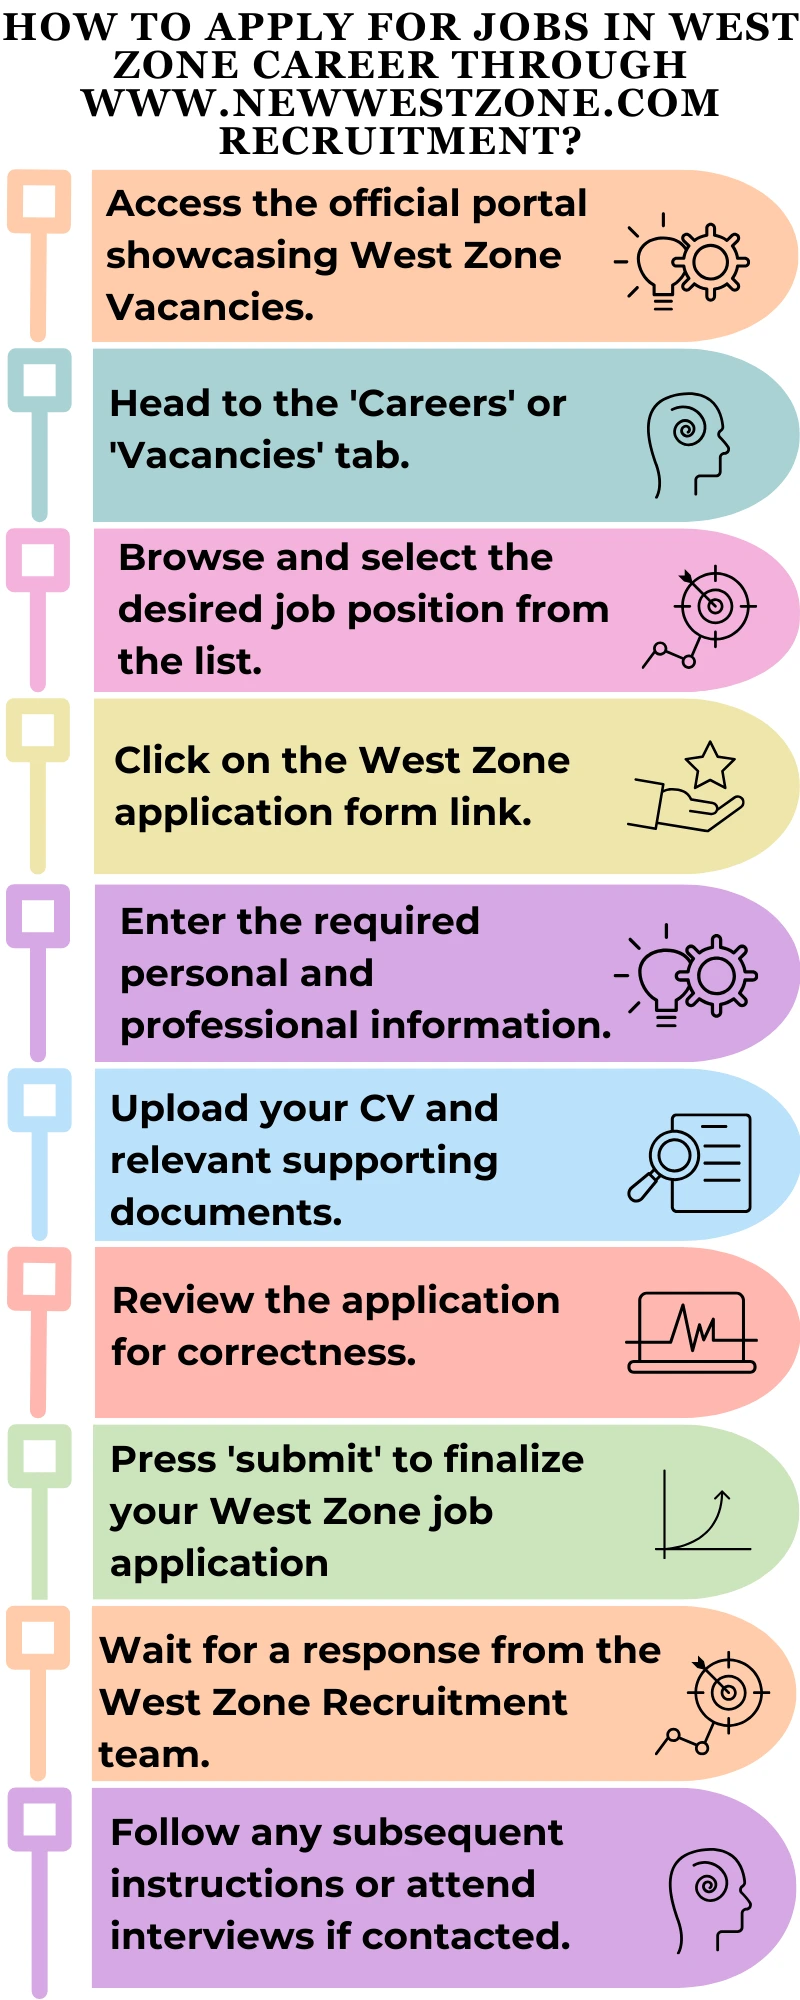 How to Apply for Jobs in West Zone Career through www.newwestzone.com recruitment?